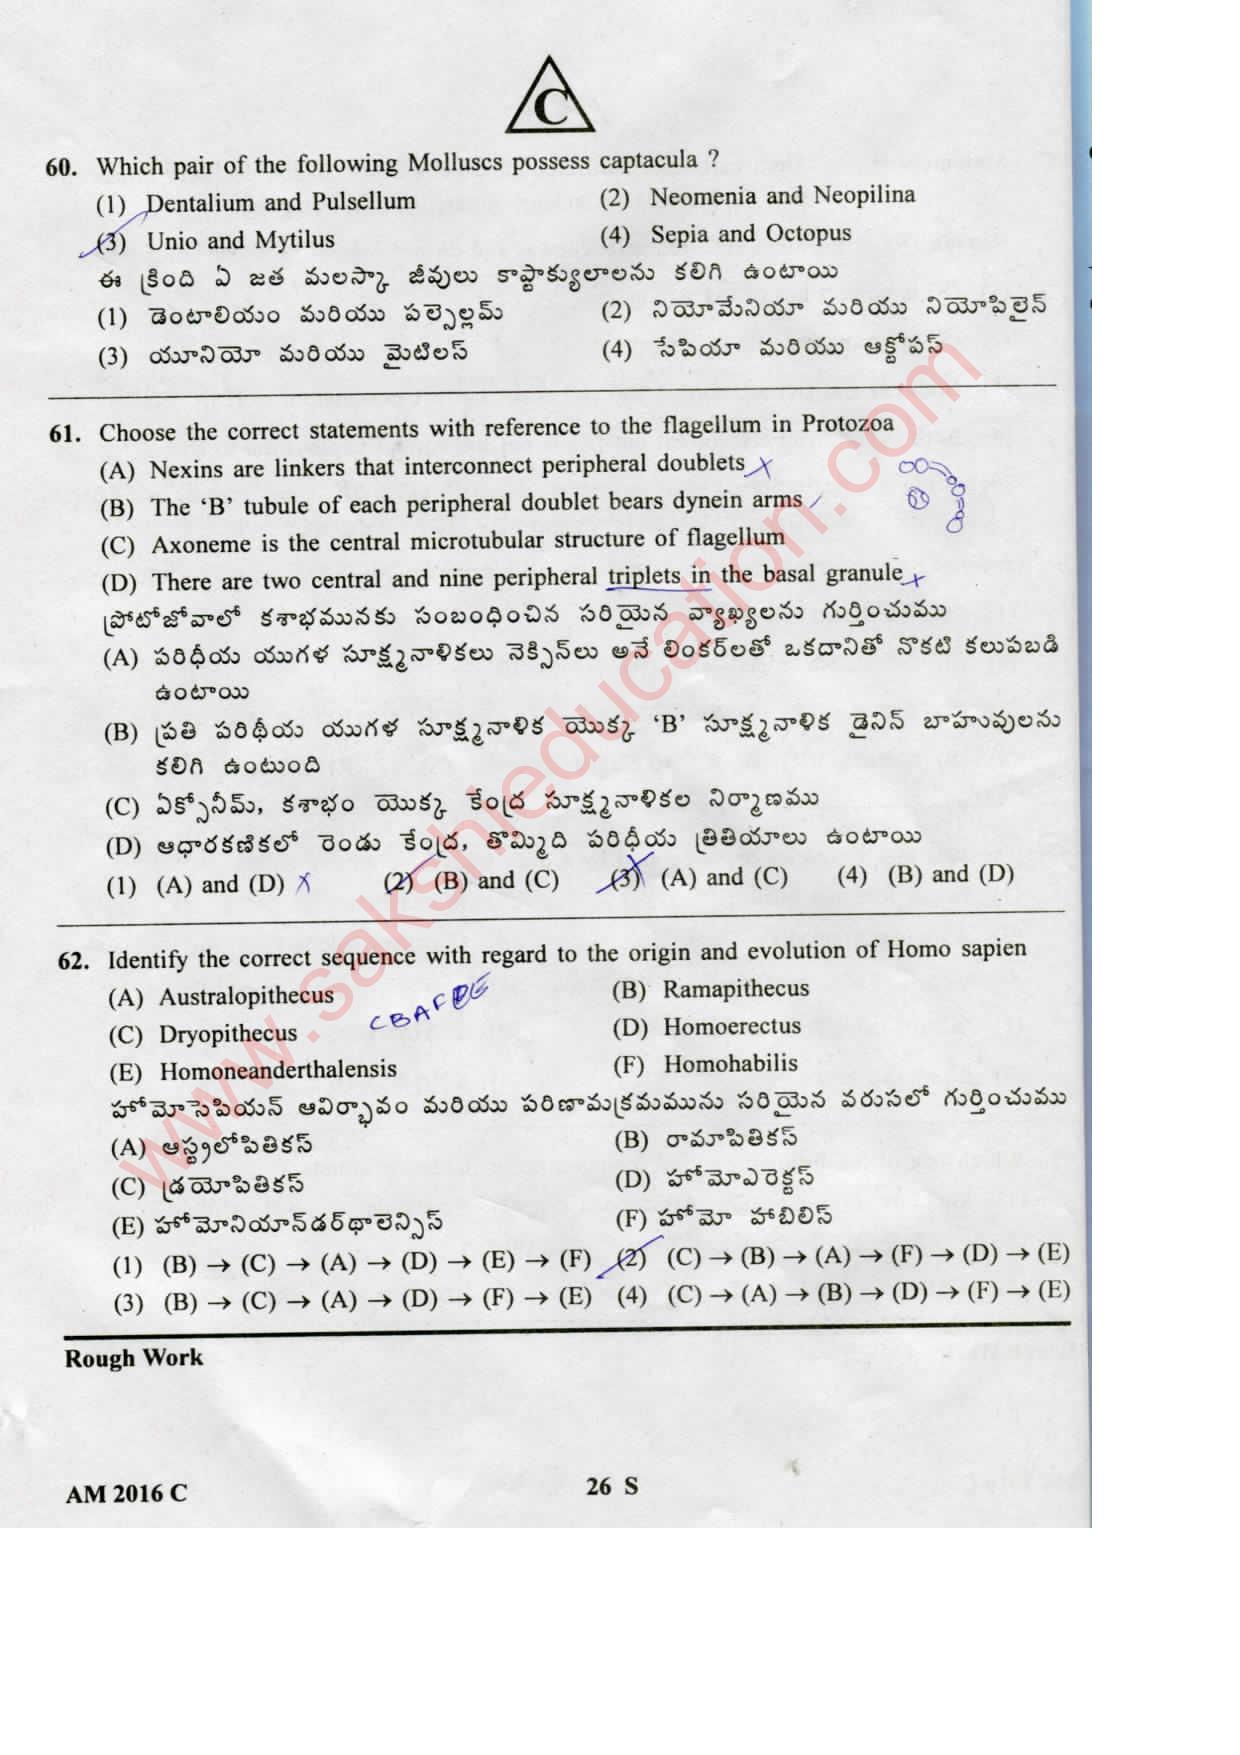 TS EAMCET 2016 Medical Question Paper with Key (Held on 15 May 2016) - Page 26